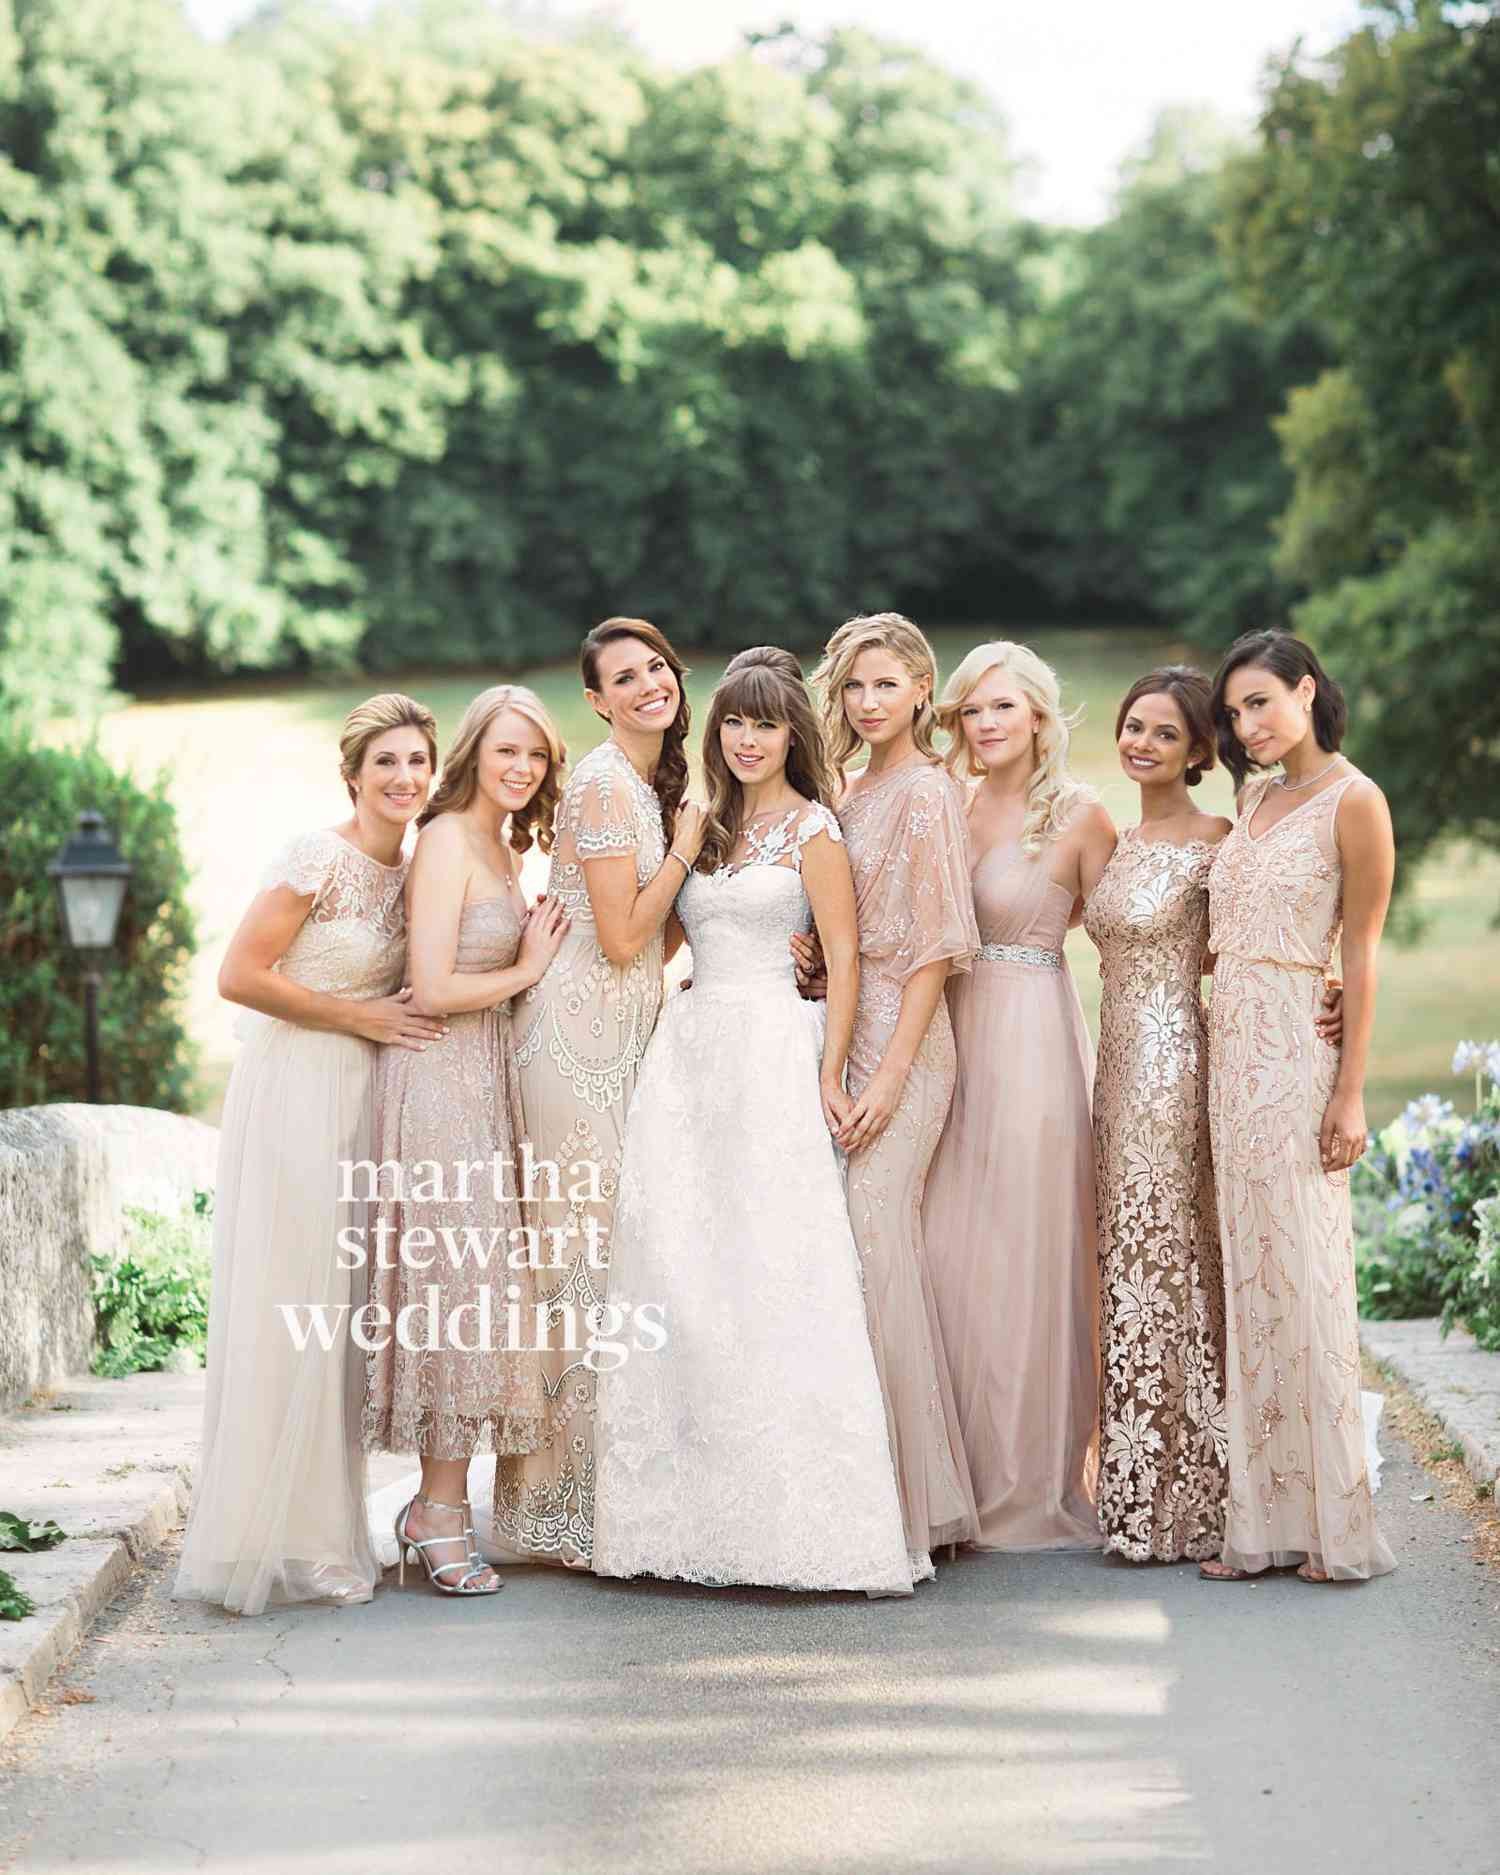 Champagne-Colored Bridesmaids' Dresses